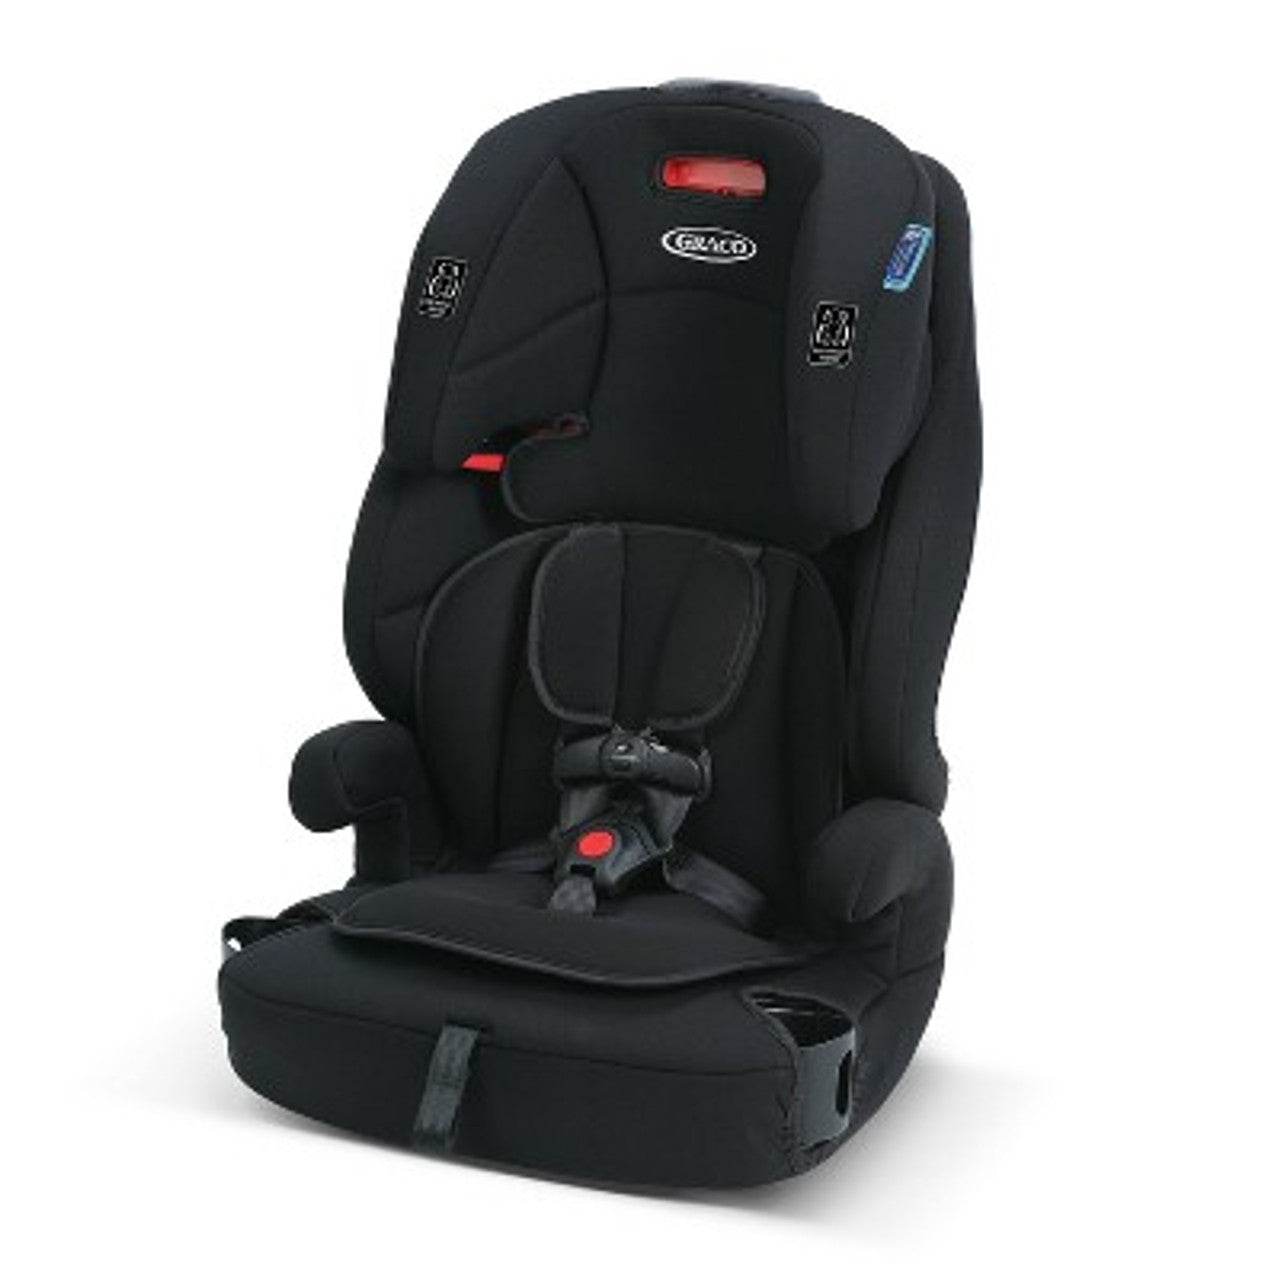 New - Graco Tranzitions 3-in-1 Harness Booster Car Seat - Proof